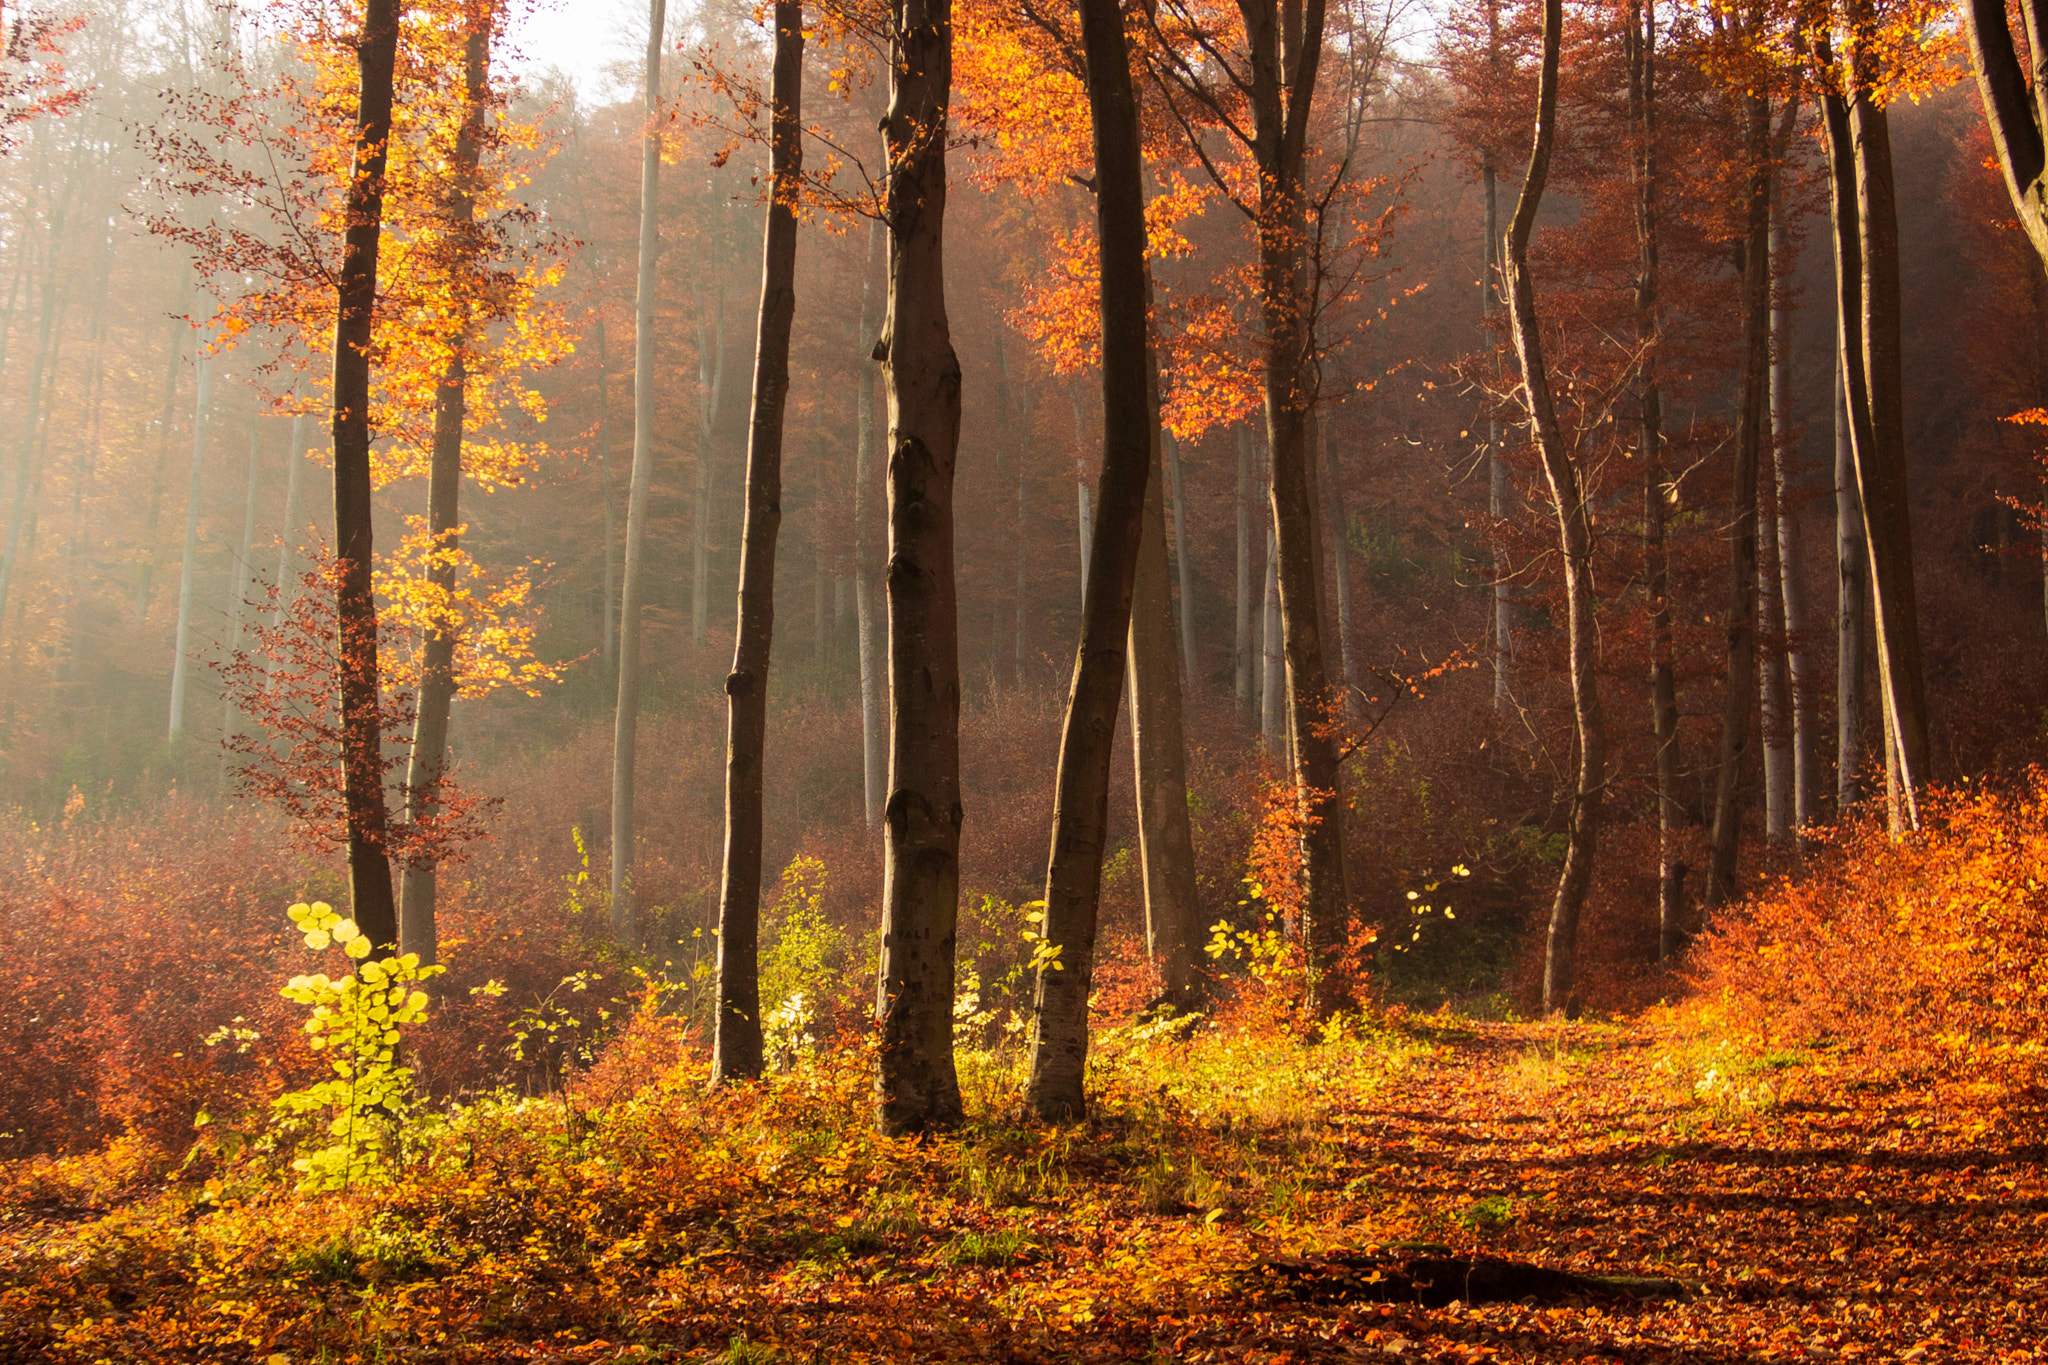 Life in the wild: Autumn forest